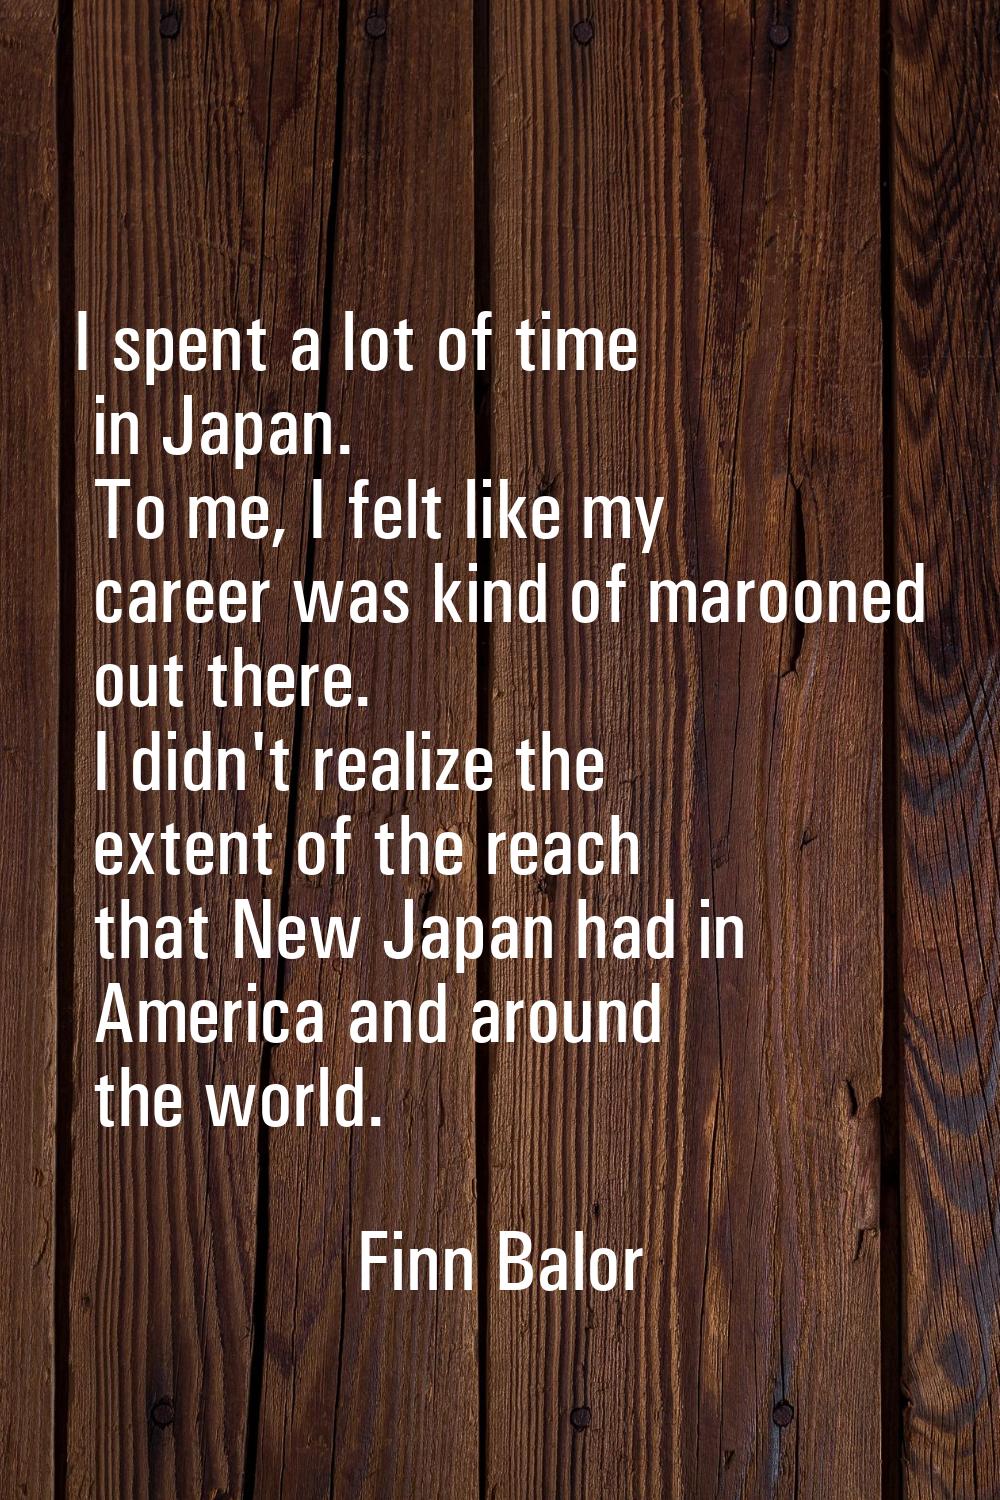 I spent a lot of time in Japan. To me, I felt like my career was kind of marooned out there. I didn